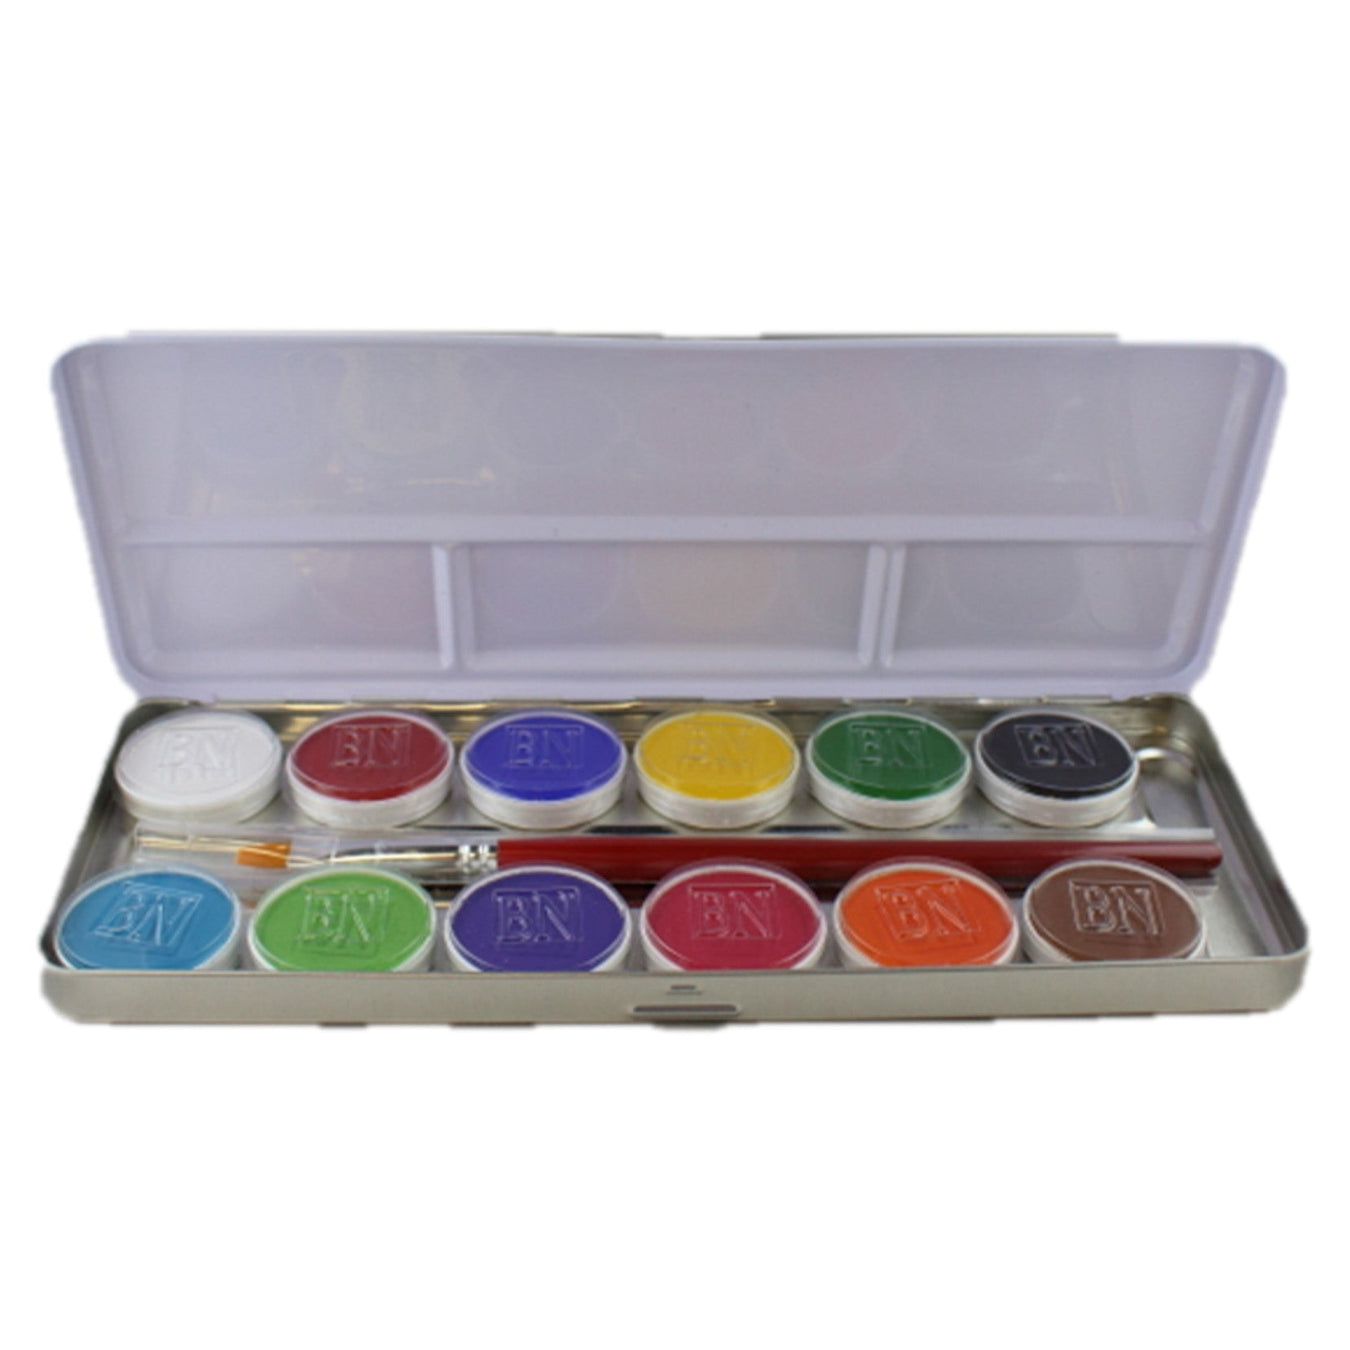 Ben Nye Face Painting Palettes